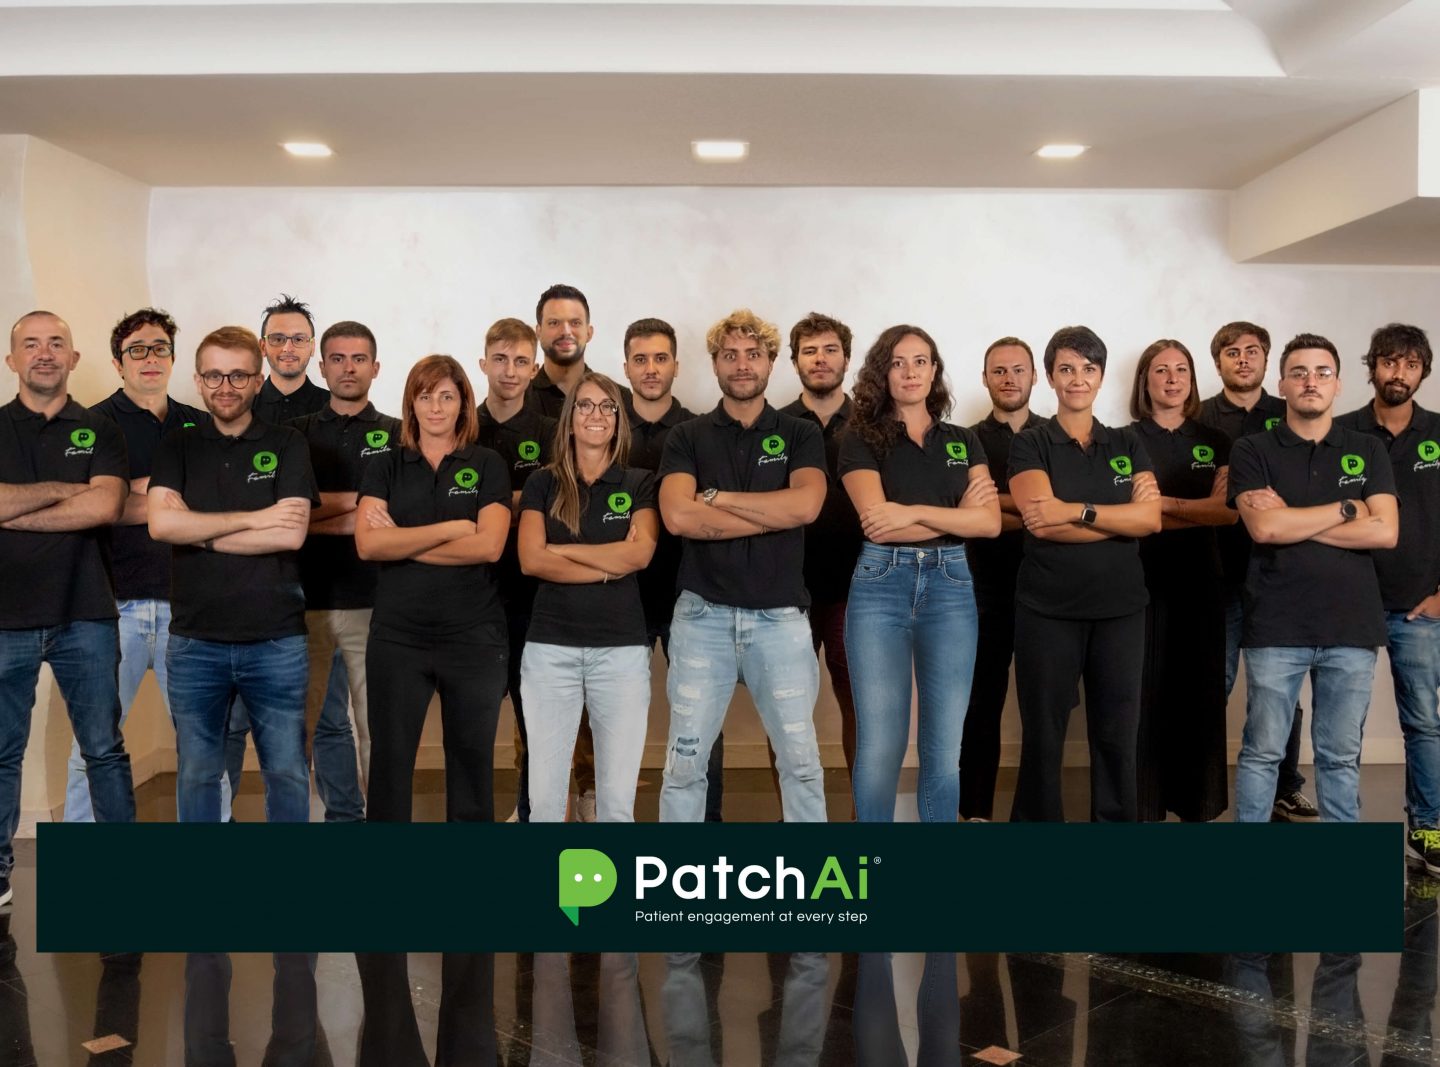 PatchAi closes a €1,7 million round to scale internationally